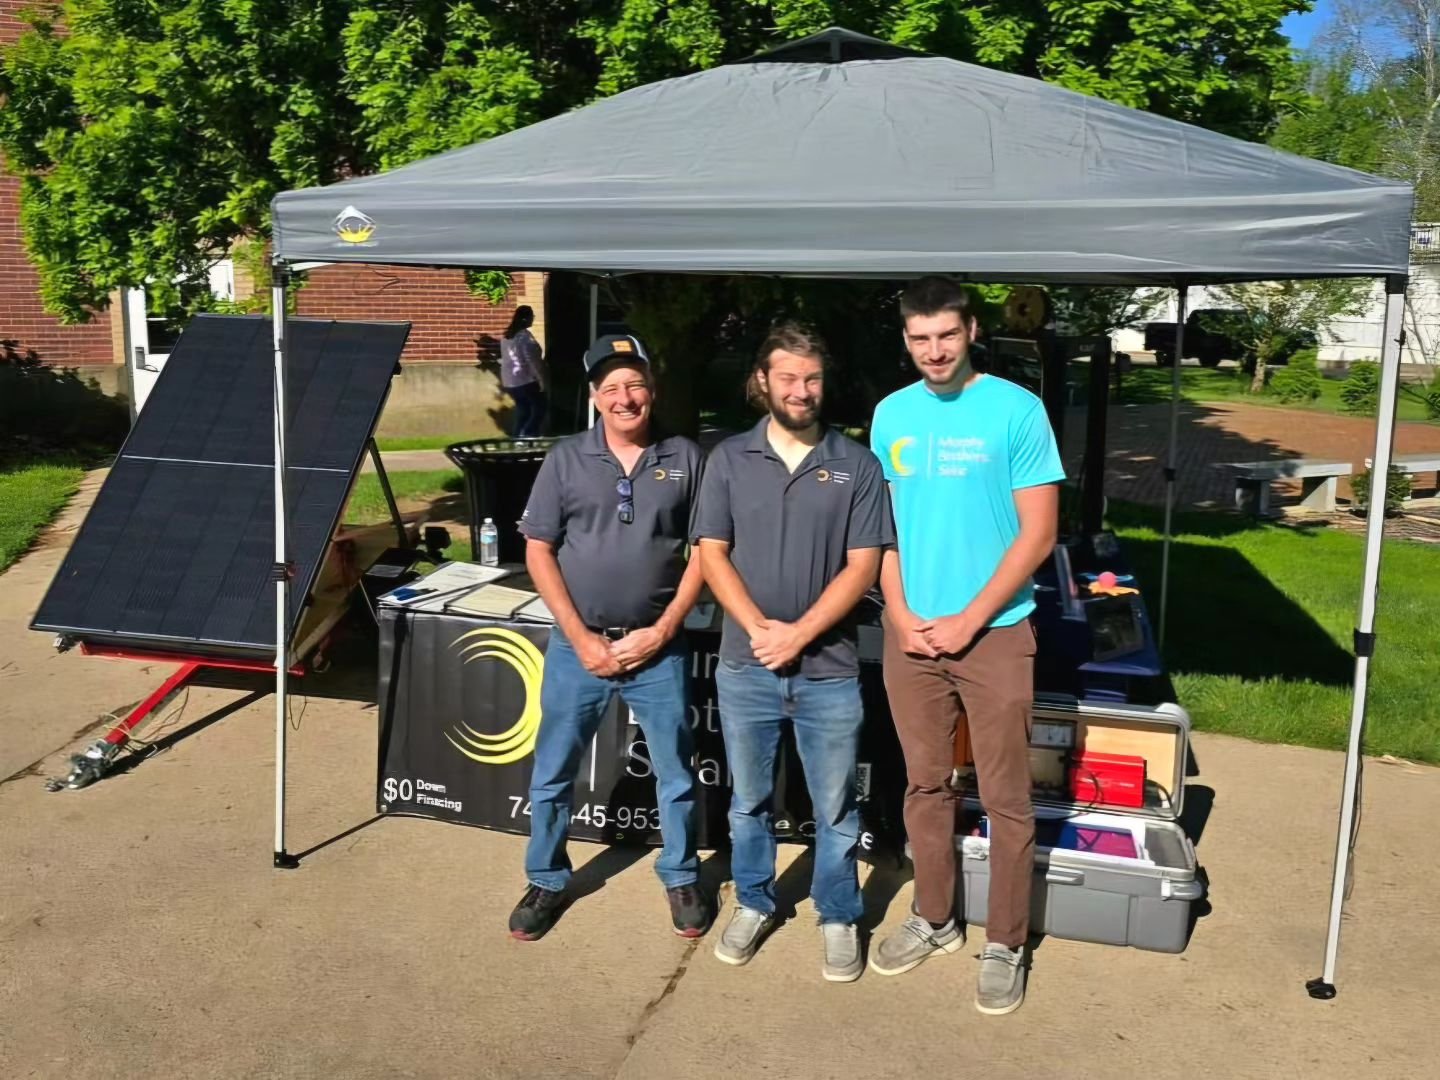 What a great Earth Day event to spend staring into the sun! Thanks Murphy Brothers Solar for partnering with us to create, what is likely, the MOV's first solar-powered 3D printer setup!